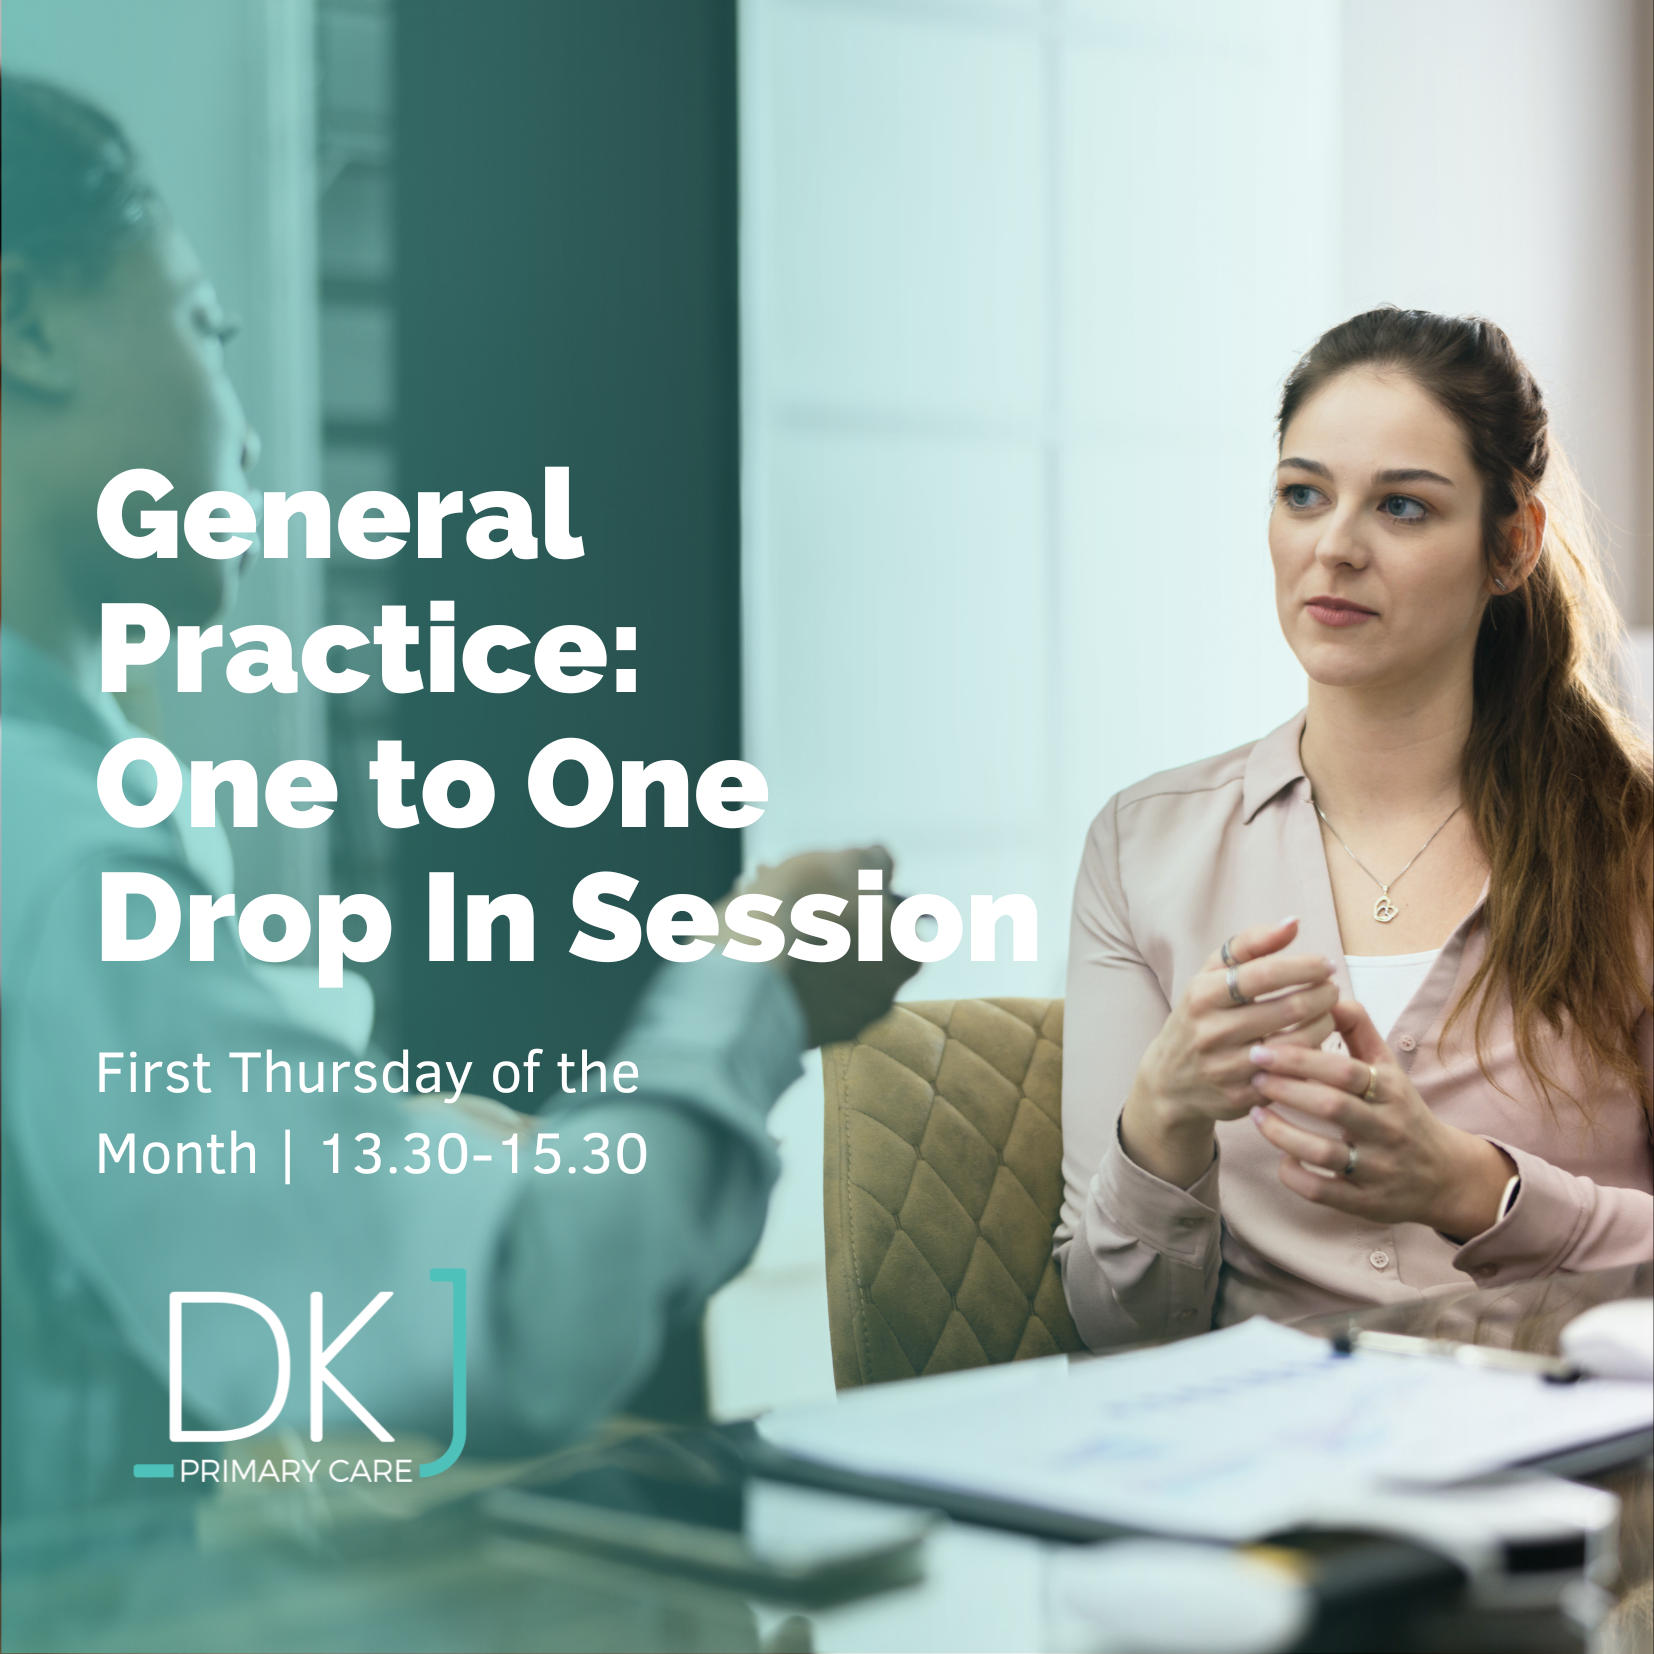 General Practice One to One Drop In